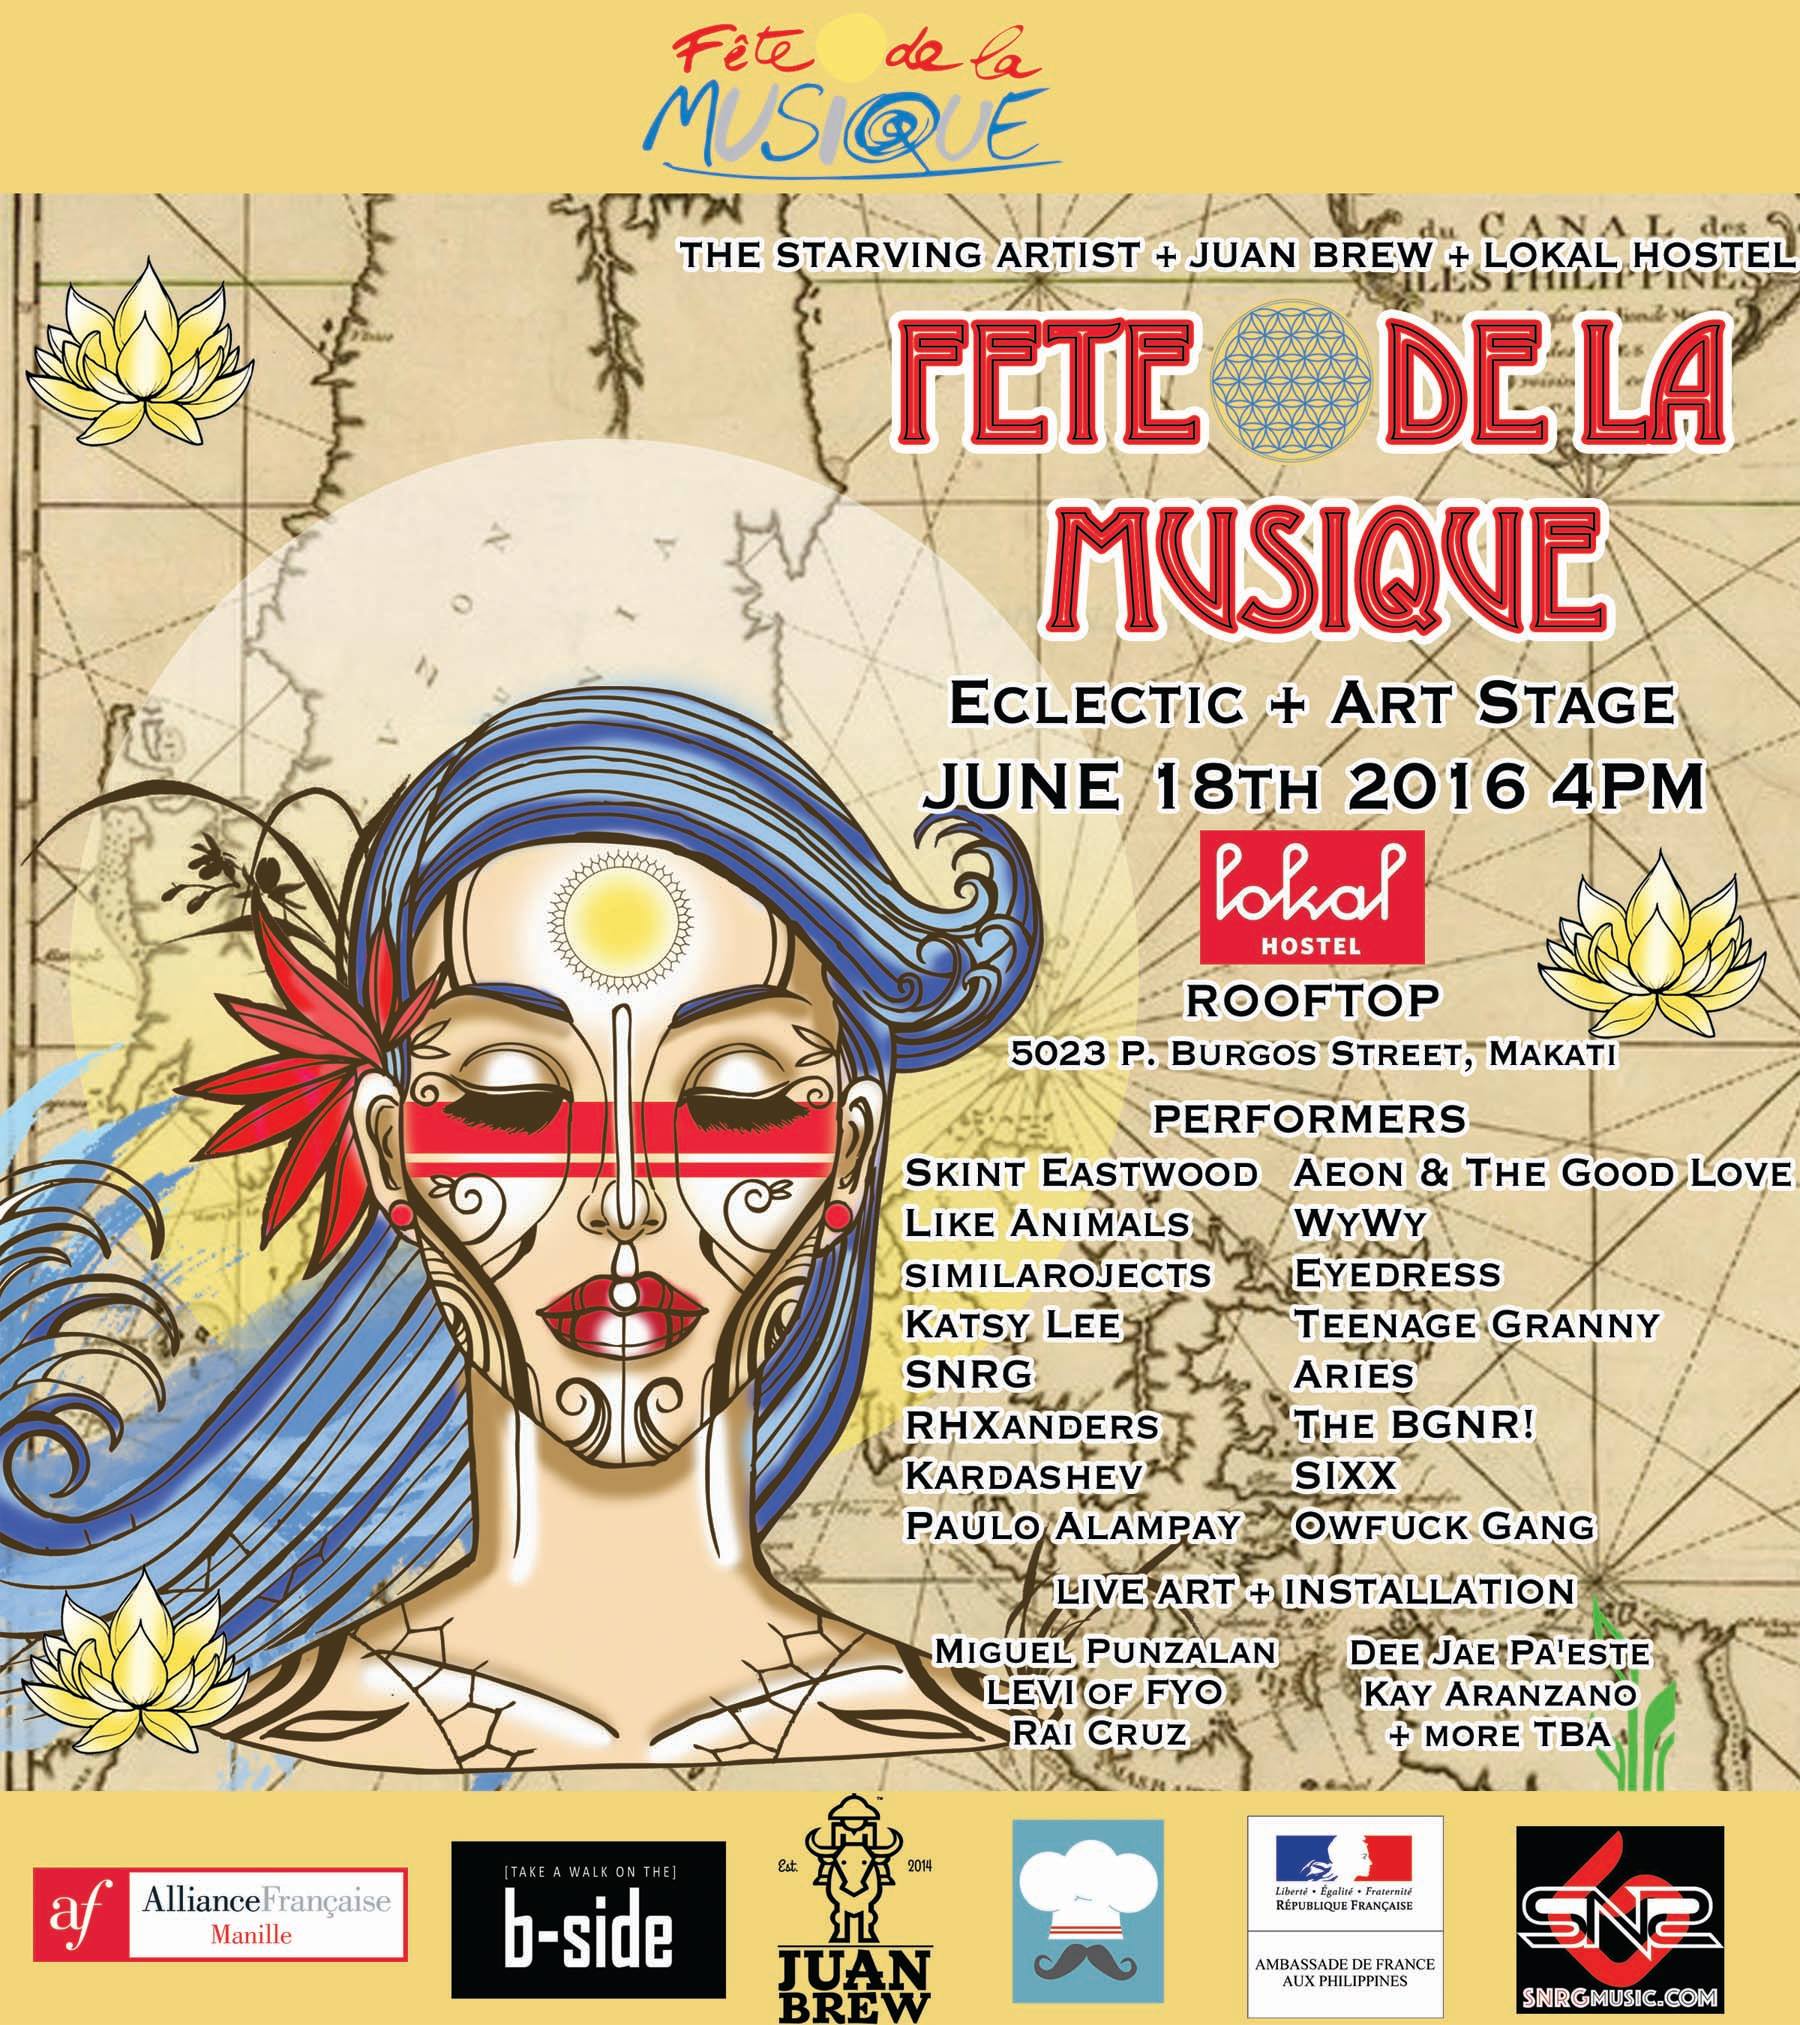 Fete De La Musique Eclectic + Art Stage 2016 clock Saturday, June 18 at 4 PM 2 days ago pin Show Map Lokal Hostel 5023 P. Burgos Street, Brgy. Poblacion, 1210 Makati, Philippines About Discussion Write Post Add Photo / Video Create Poll Details FETE DE LA MUSIQUE 2016 ---------------------------------------------------------- ECLECTIC + ART STAGE at Lokal Hostel ROOFTOP brought to you by The Starving Artist + Juan Brew + Lokal Hostel We Are Back for another year of Fete De La Musique on the Lokal Rooftop With some of Manila's most eclectic and creative musicians paired with visuals and Live Art, Local food and some hand made goods. :::::::::::::::::::::::::::::::::::::::::::::::::::::::::::::::::::::: PERFORMERS: Eyedress Like Animals SNRG Skint Eastwood Aeon and the Good Love similarobjects WYWY Kardashev Teenage Granny Aries PJ Paradise (WeRWolvz) Paulo Alampay The BGNR! RHXANDERS Katsy Lee SIXX Owfuck Gang and more TBA Live Art and Installations: Levi of FYO Miguel Punzalan Rai Cruz Dee Jae Pa'este Sherlaine Yap Kay Aranzanso Beer and Beverages by the good folks of JUAN BREW FOOD by Tacos Chingones Flippin Cow Hand Crafted Goods By: Beweave it Or Knot & Friends :::::::::::::::::::::::::::::::::::::::::::::::::::::::::::::::::::::: #StarvingArtistPh #LokalRooftop #LokalHostel #Fete2016 ----- Dee Jae Paeste‎Fete De La Musique Eclectic + Art Stage 2016 Follow · June 7 · Fete De La Musique 2016 ECLECTIC + ART STAGE at Lokal Hostel ROOFTOP brought to you by The Starving Artist + Juan Brew + Lokal Hostel We Are Back for another year of Fete De La Musique on the Lokal Rooftop With some of Manila's most eclectic and creative musicians paired with visuals and Live Art, Local food and some hand made goods. Come through and Support the local scene and enjoy all the good energy and vibes!